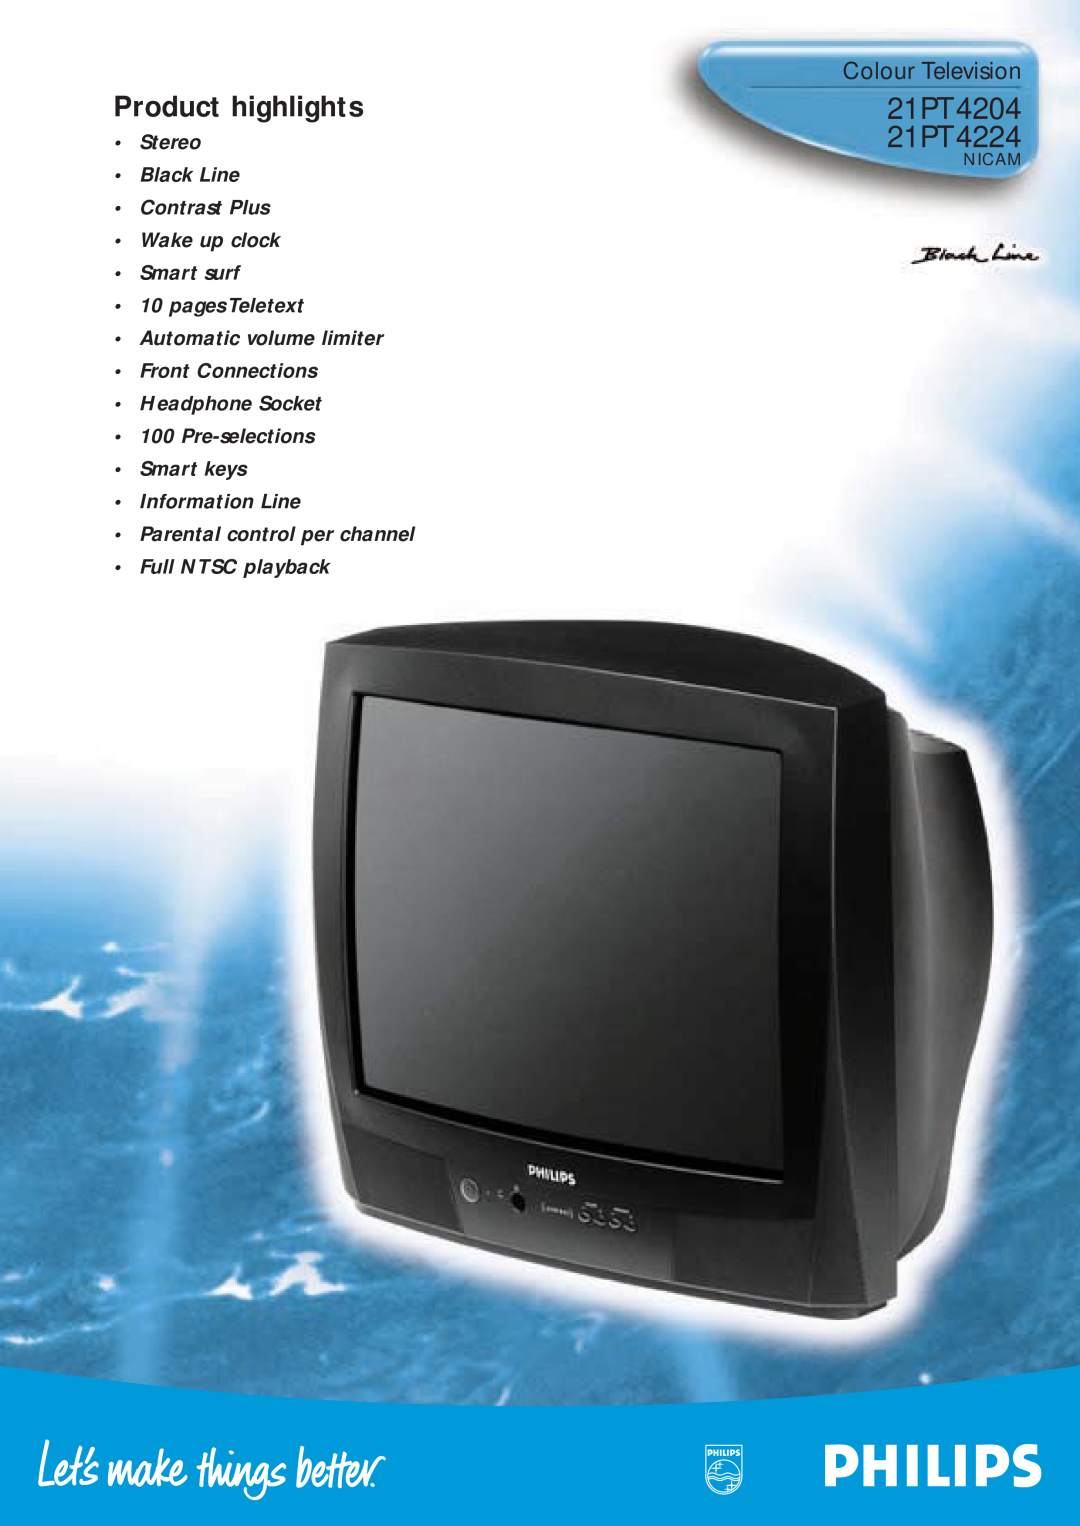 Philips manual 21PT4204 21PT4224, Colour Television, Nicam, Product highlights 